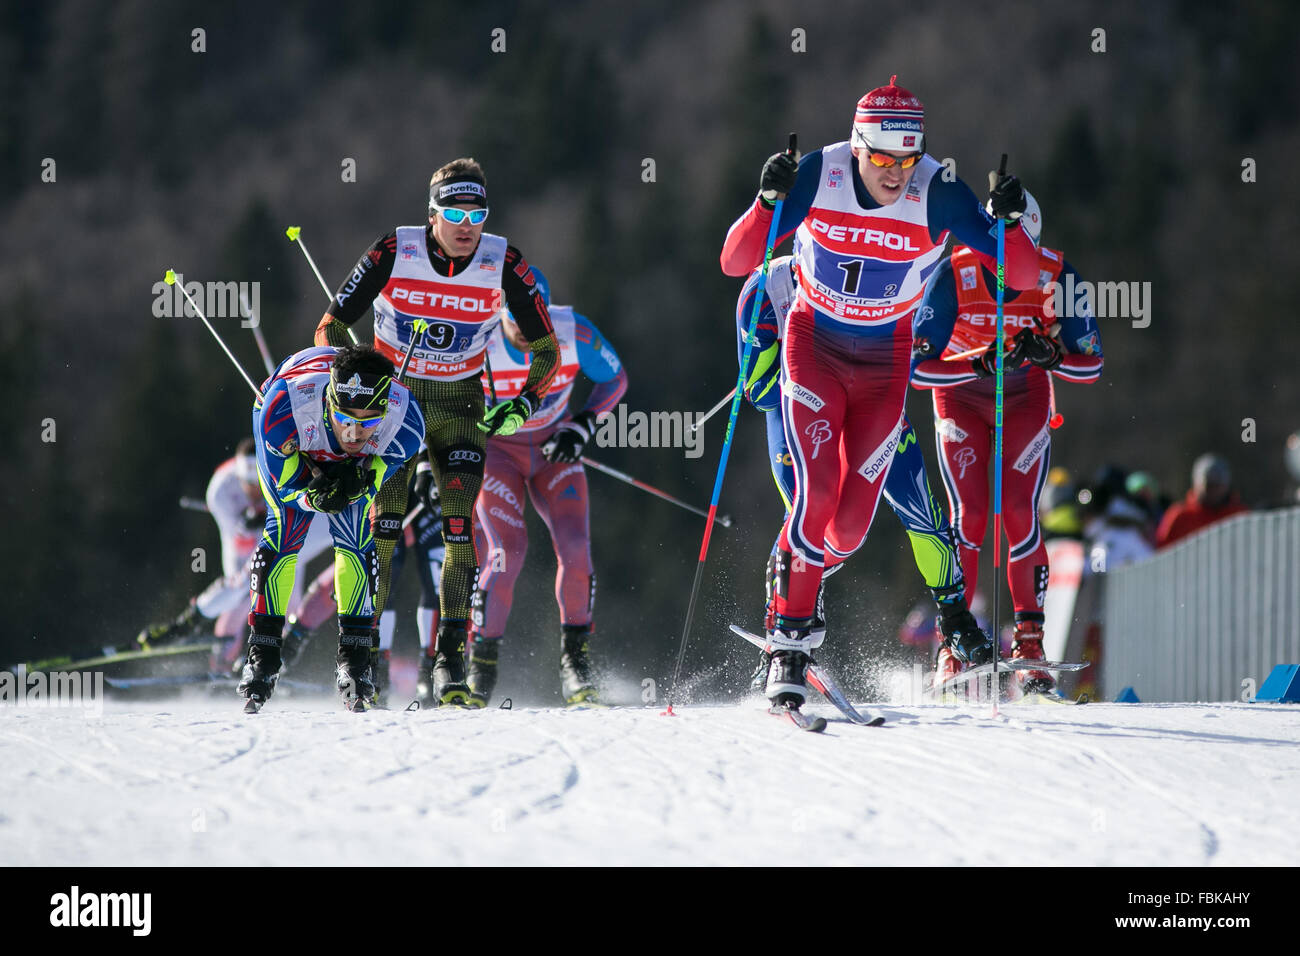 Planica, Slovenia. 17th Jan, 2016. Paal Golberg (R Front) of Norway competes in the FIS Cross-Country World Cup Men's Team Sprint competition final in Planica, Slovenia, on Jan. 17, 2016. The new Nordic Center Planica, home of the largest ski jump in the world and the famous annual venue of the ski jumping finals, hosted its first ever FIS Cross-Country World Cup competition this weekend. Sweden won in ladies' team sprint, and Italy won in men's competition. Credit:  Luka Dakskobler/Xinhua/Alamy Live News Stock Photo